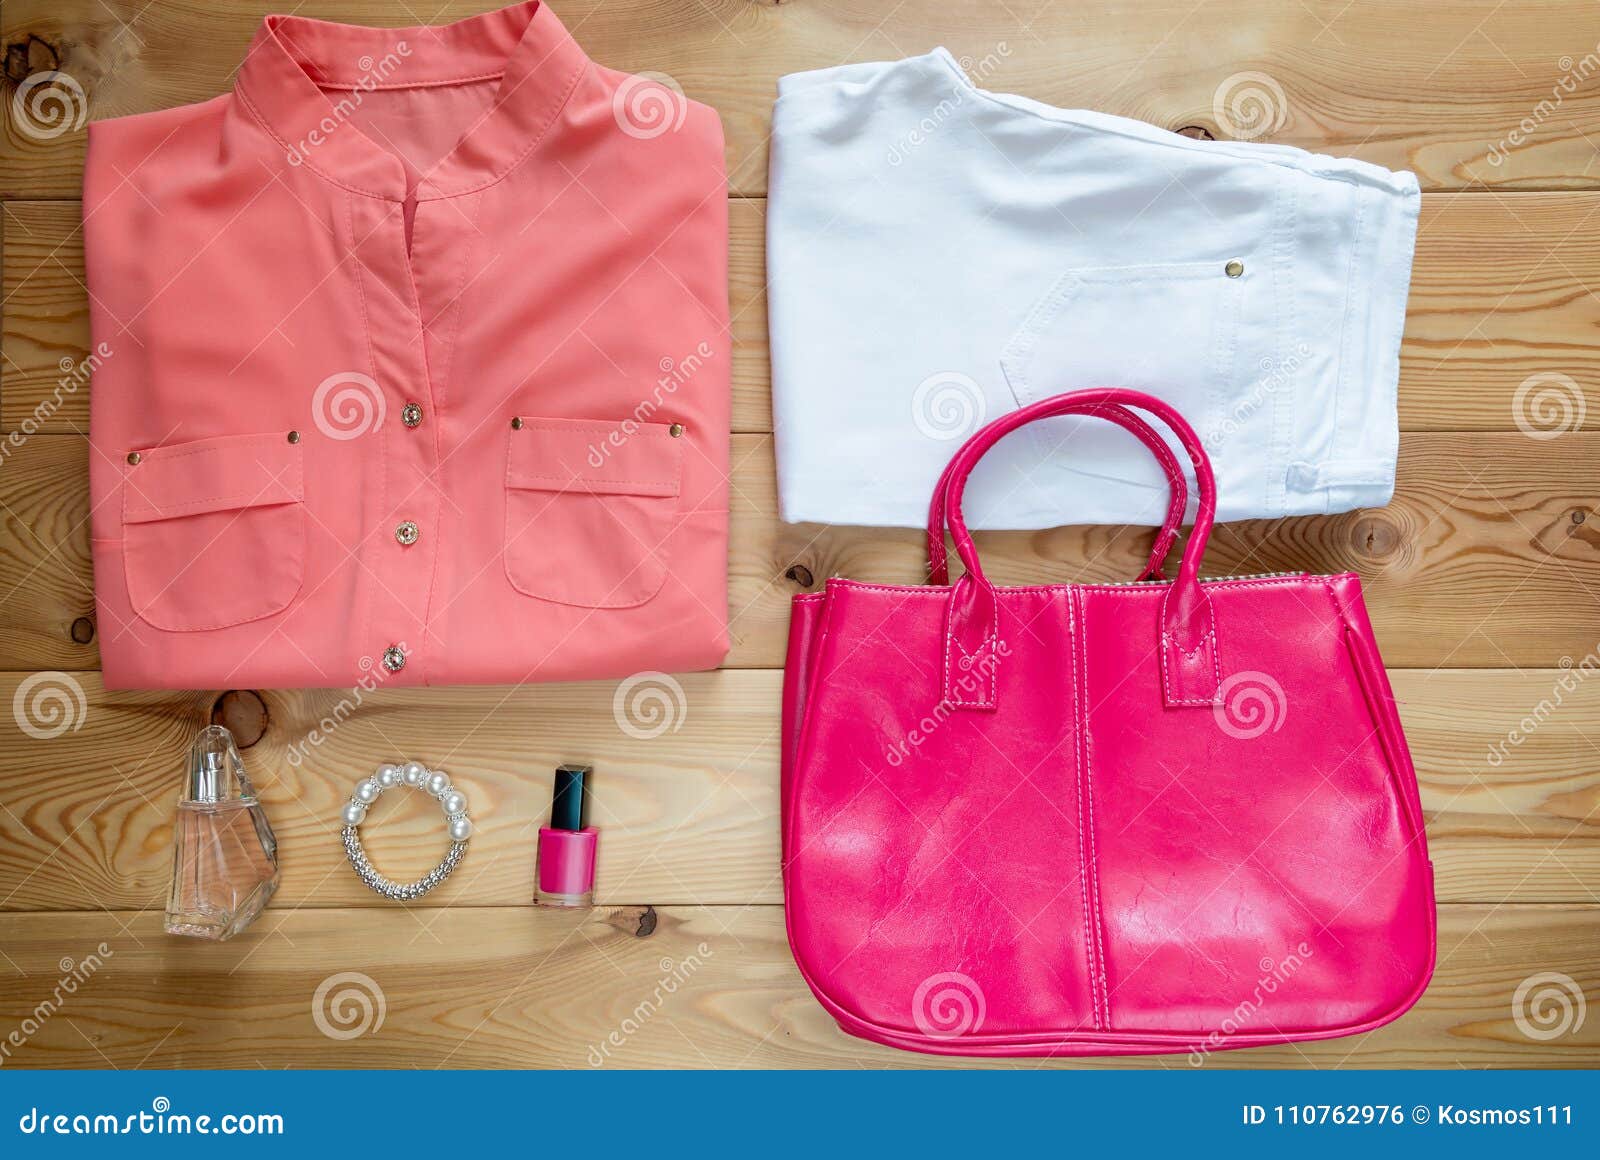 A Stylish Set of Clothes and Accessories Stock Photo - Image of clothes ...